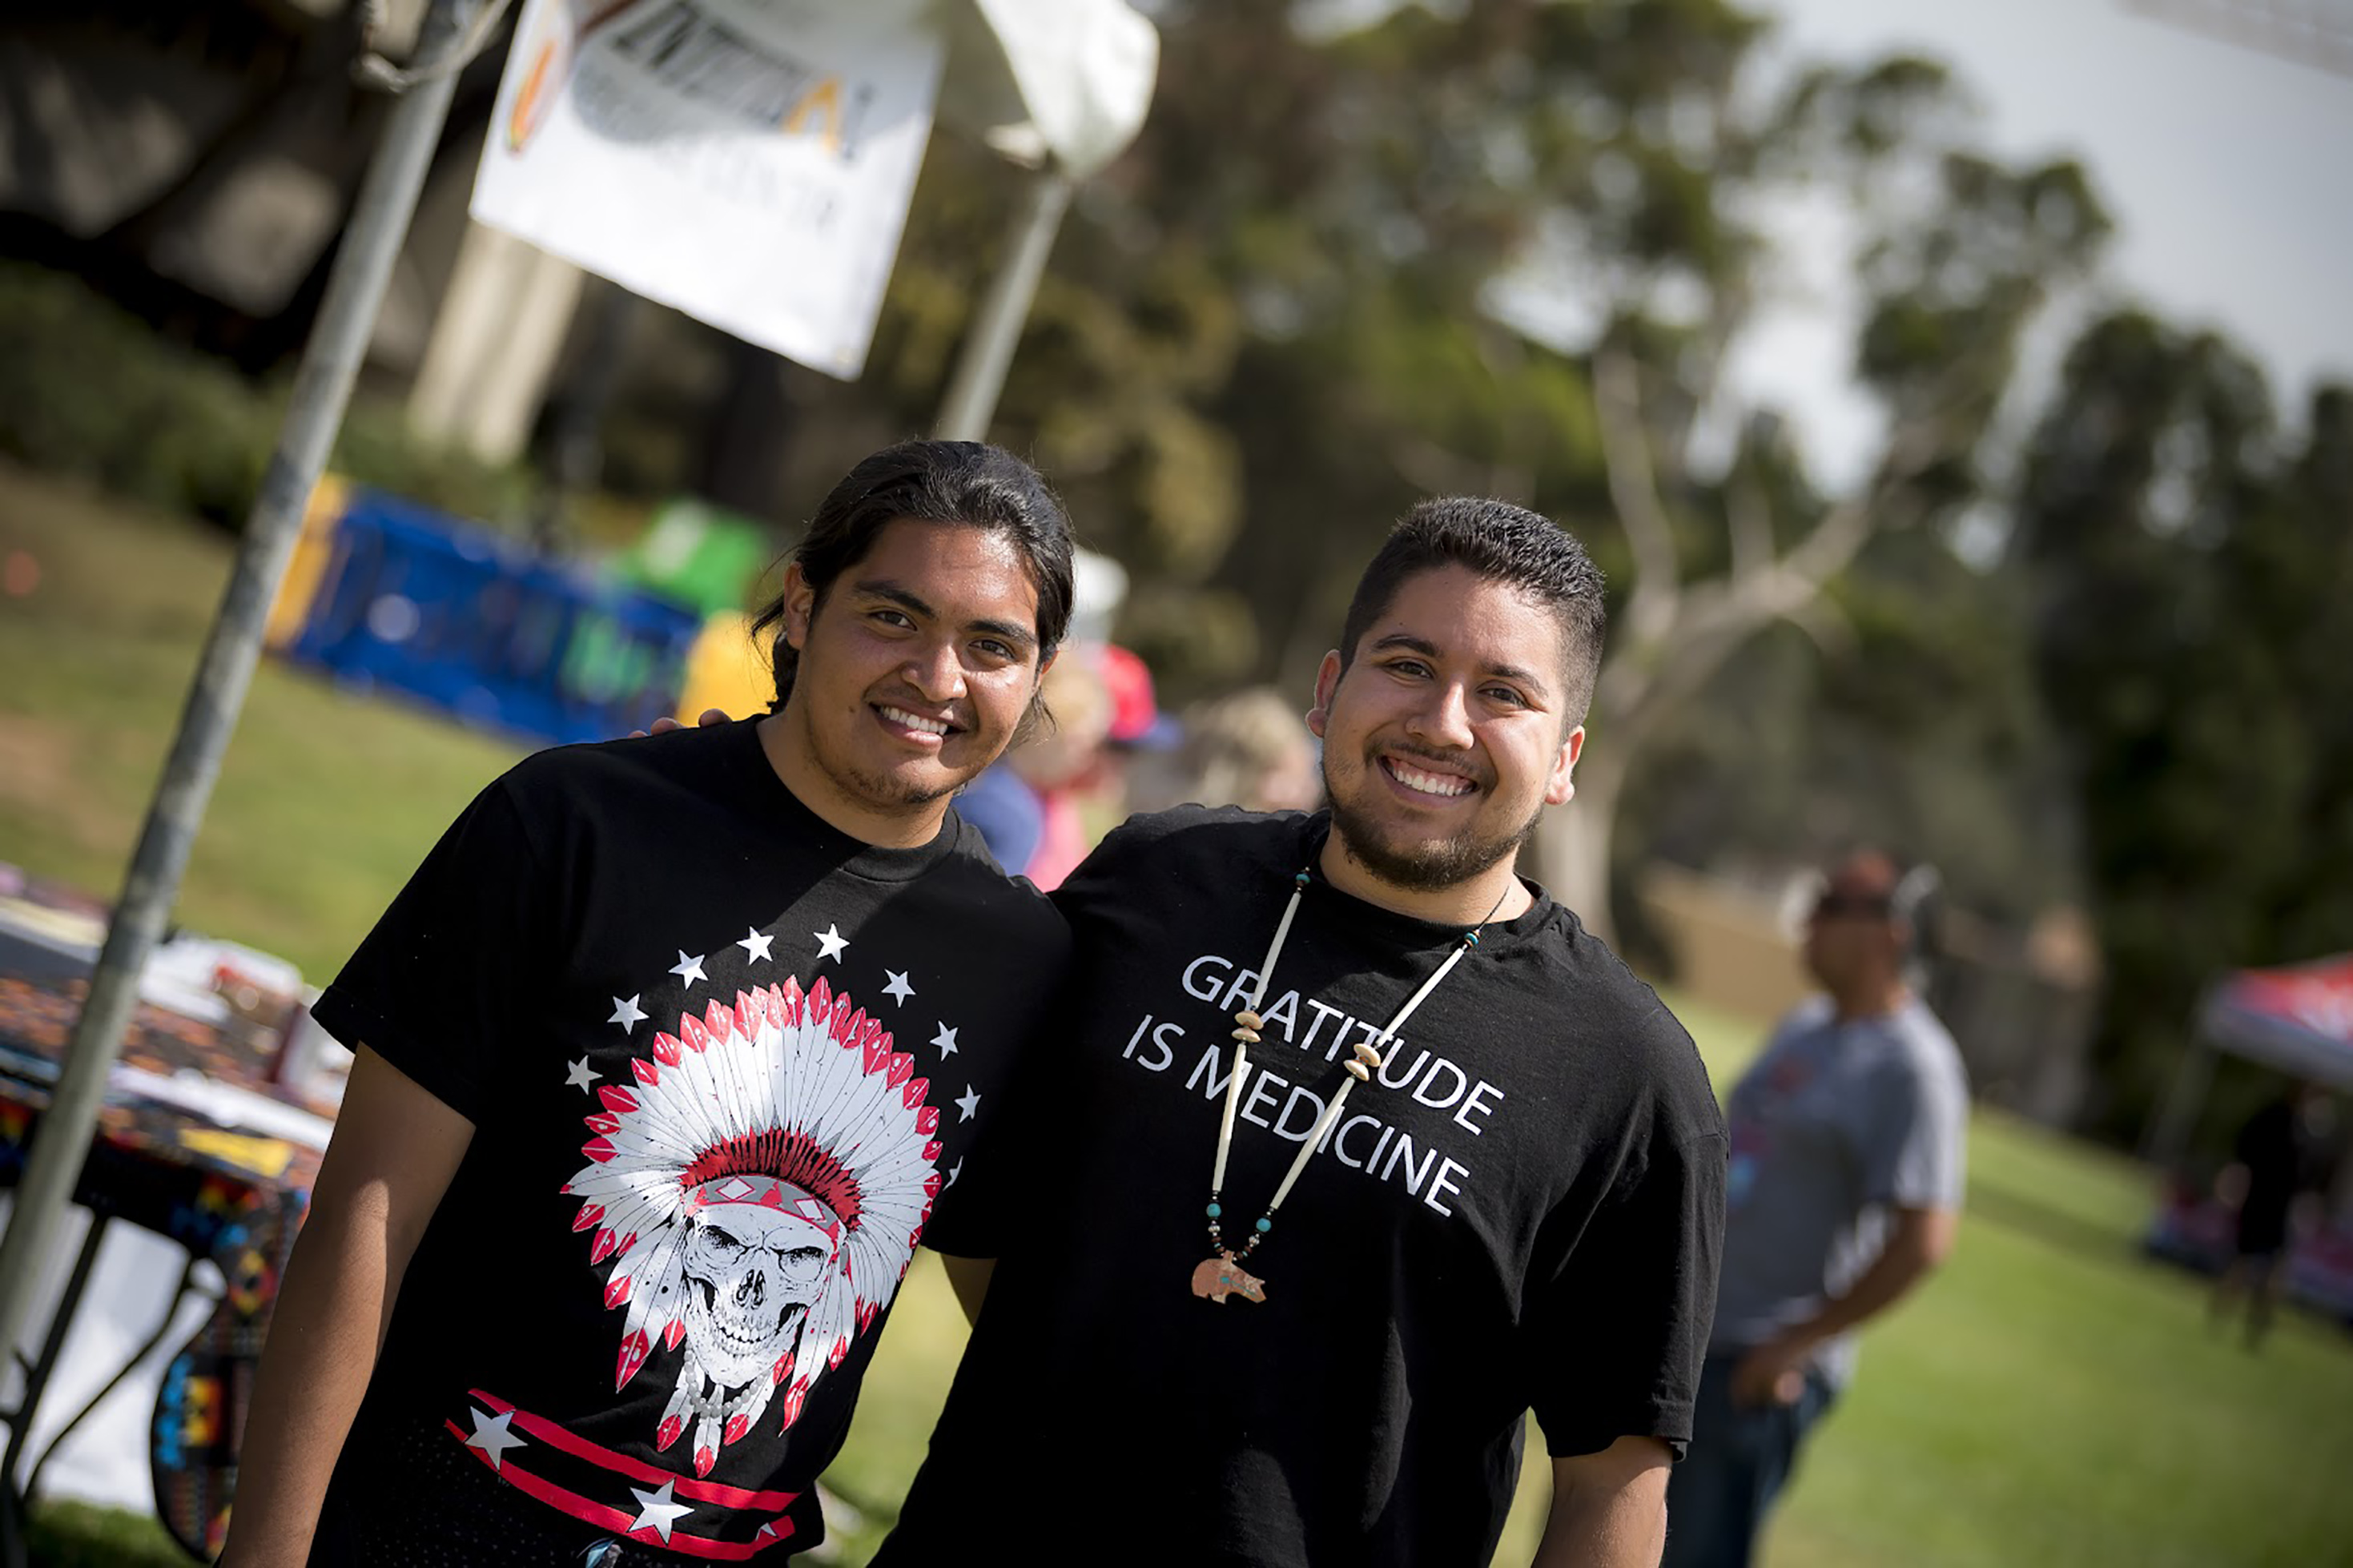 Two young Native American men standing together on campus